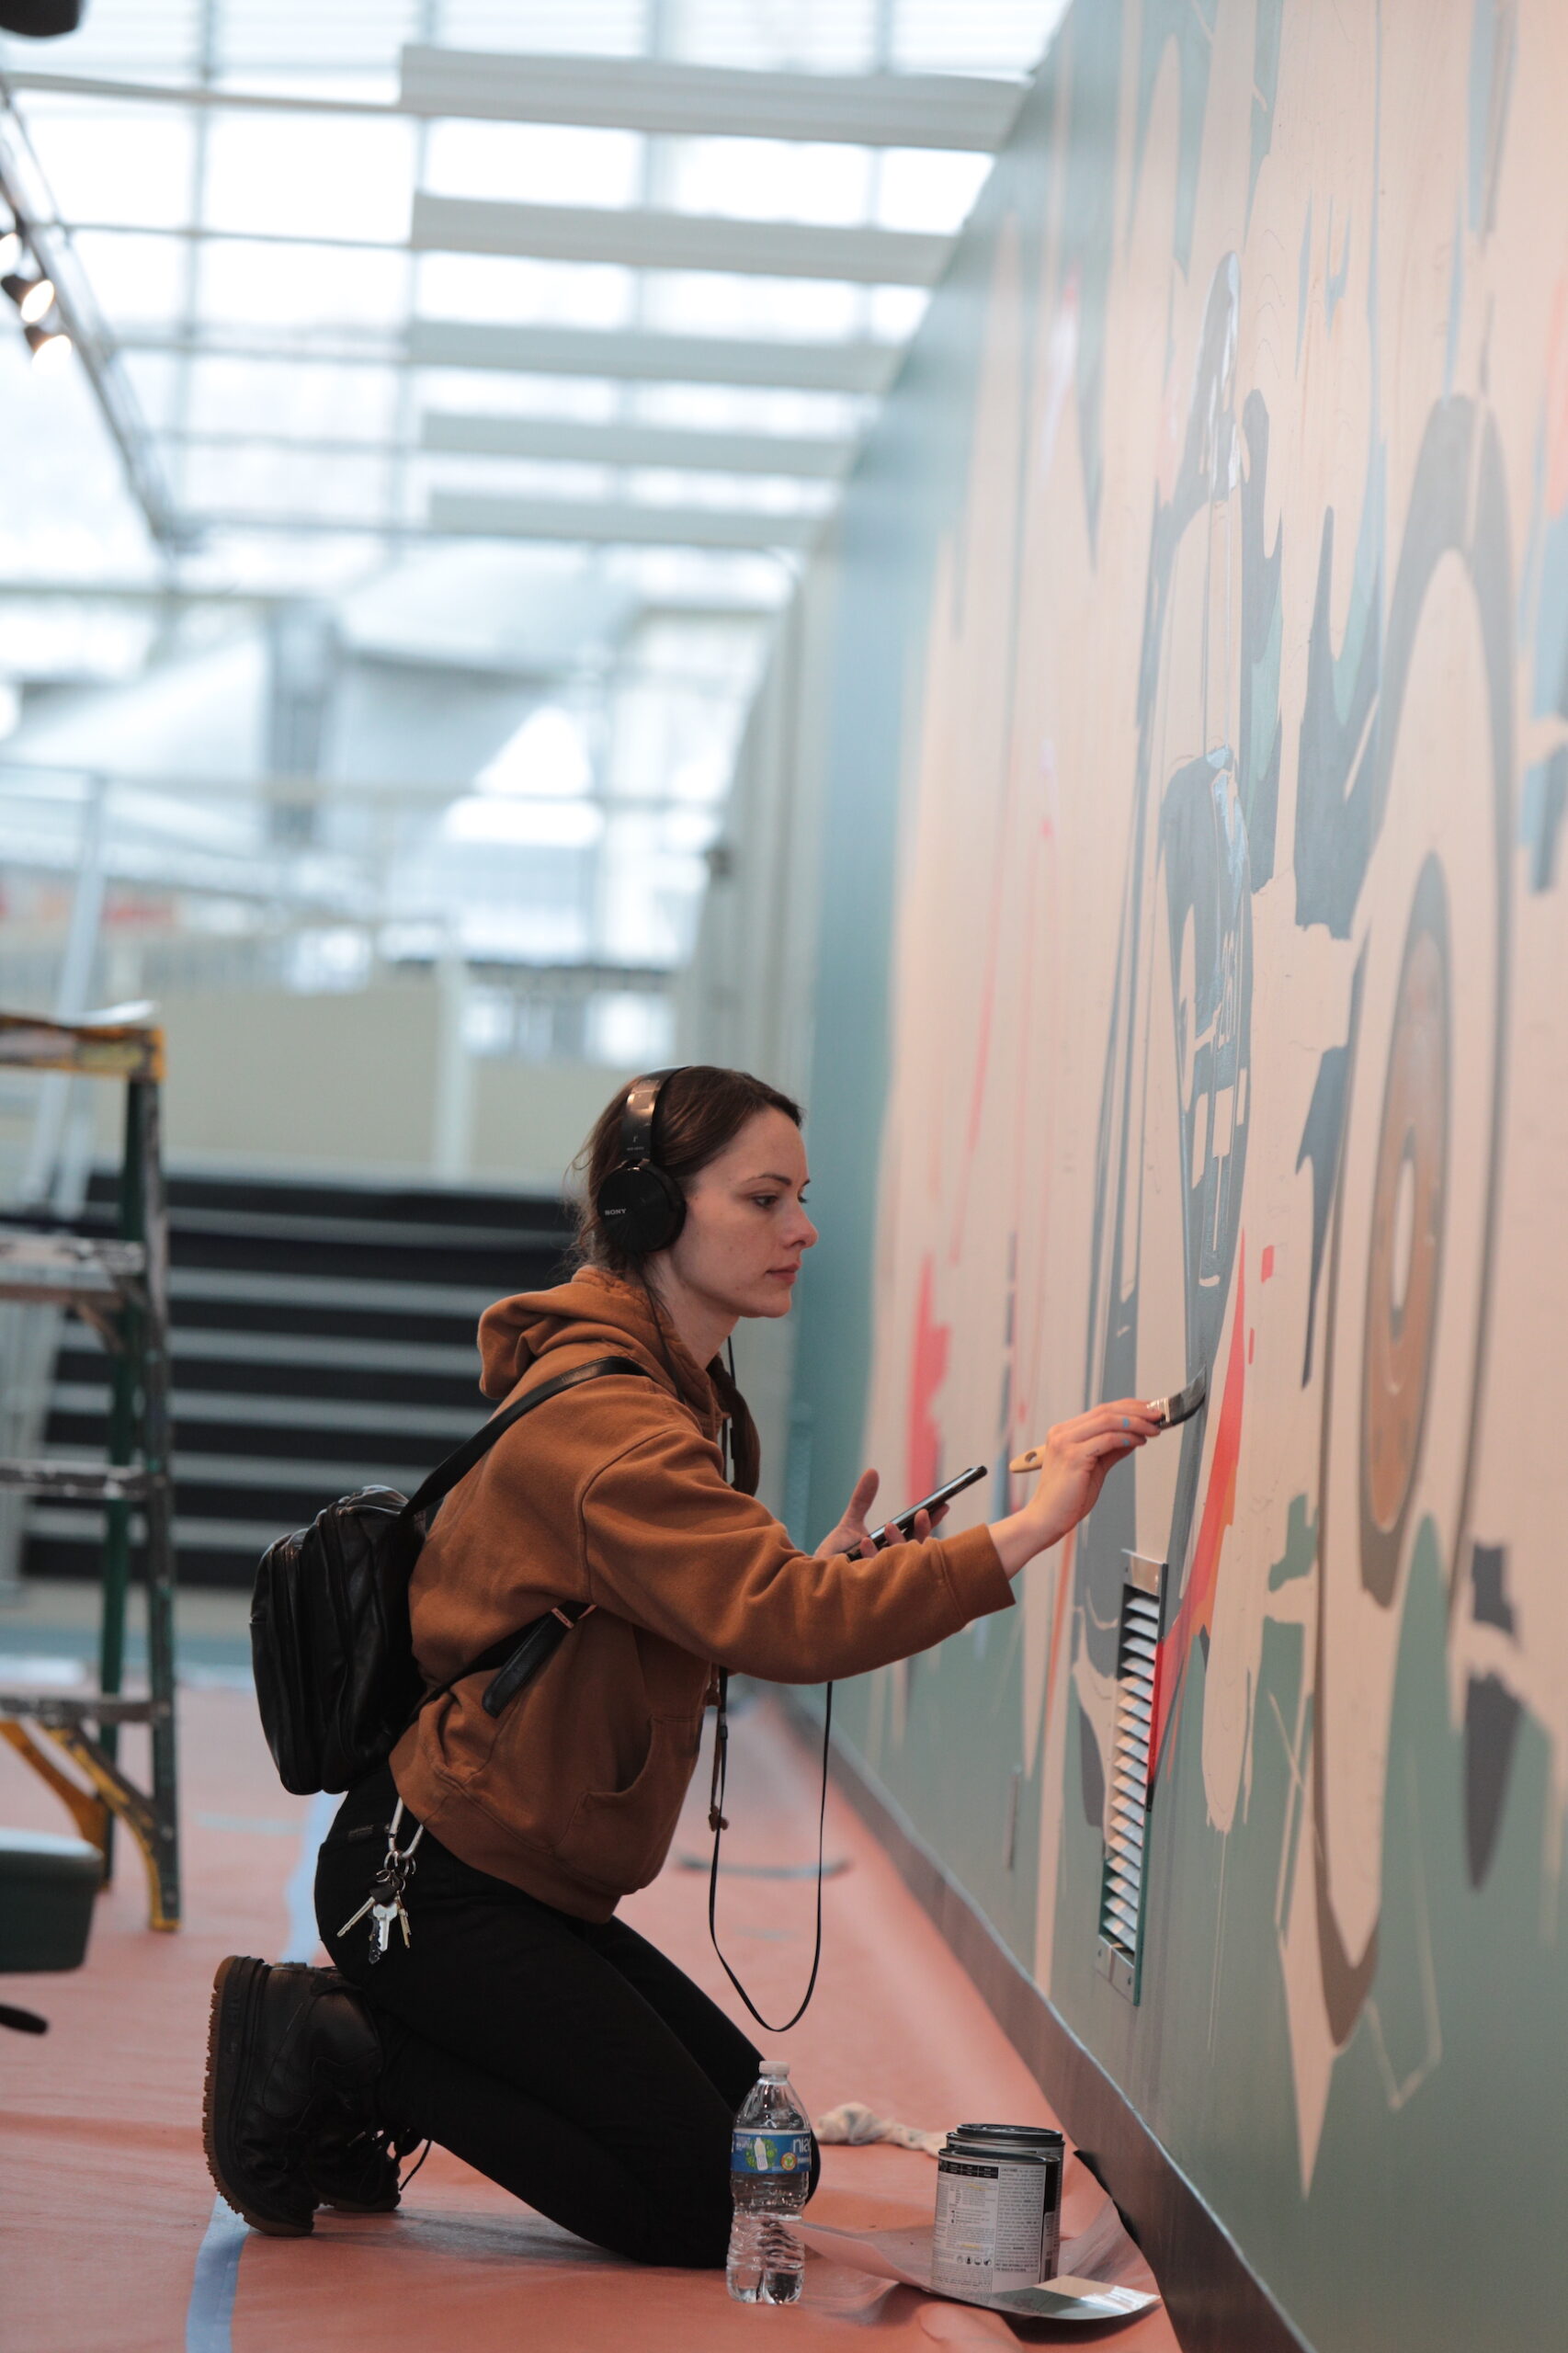 A woman with long brown hair wearing an orange sweatshirt paints a mural on a wall.